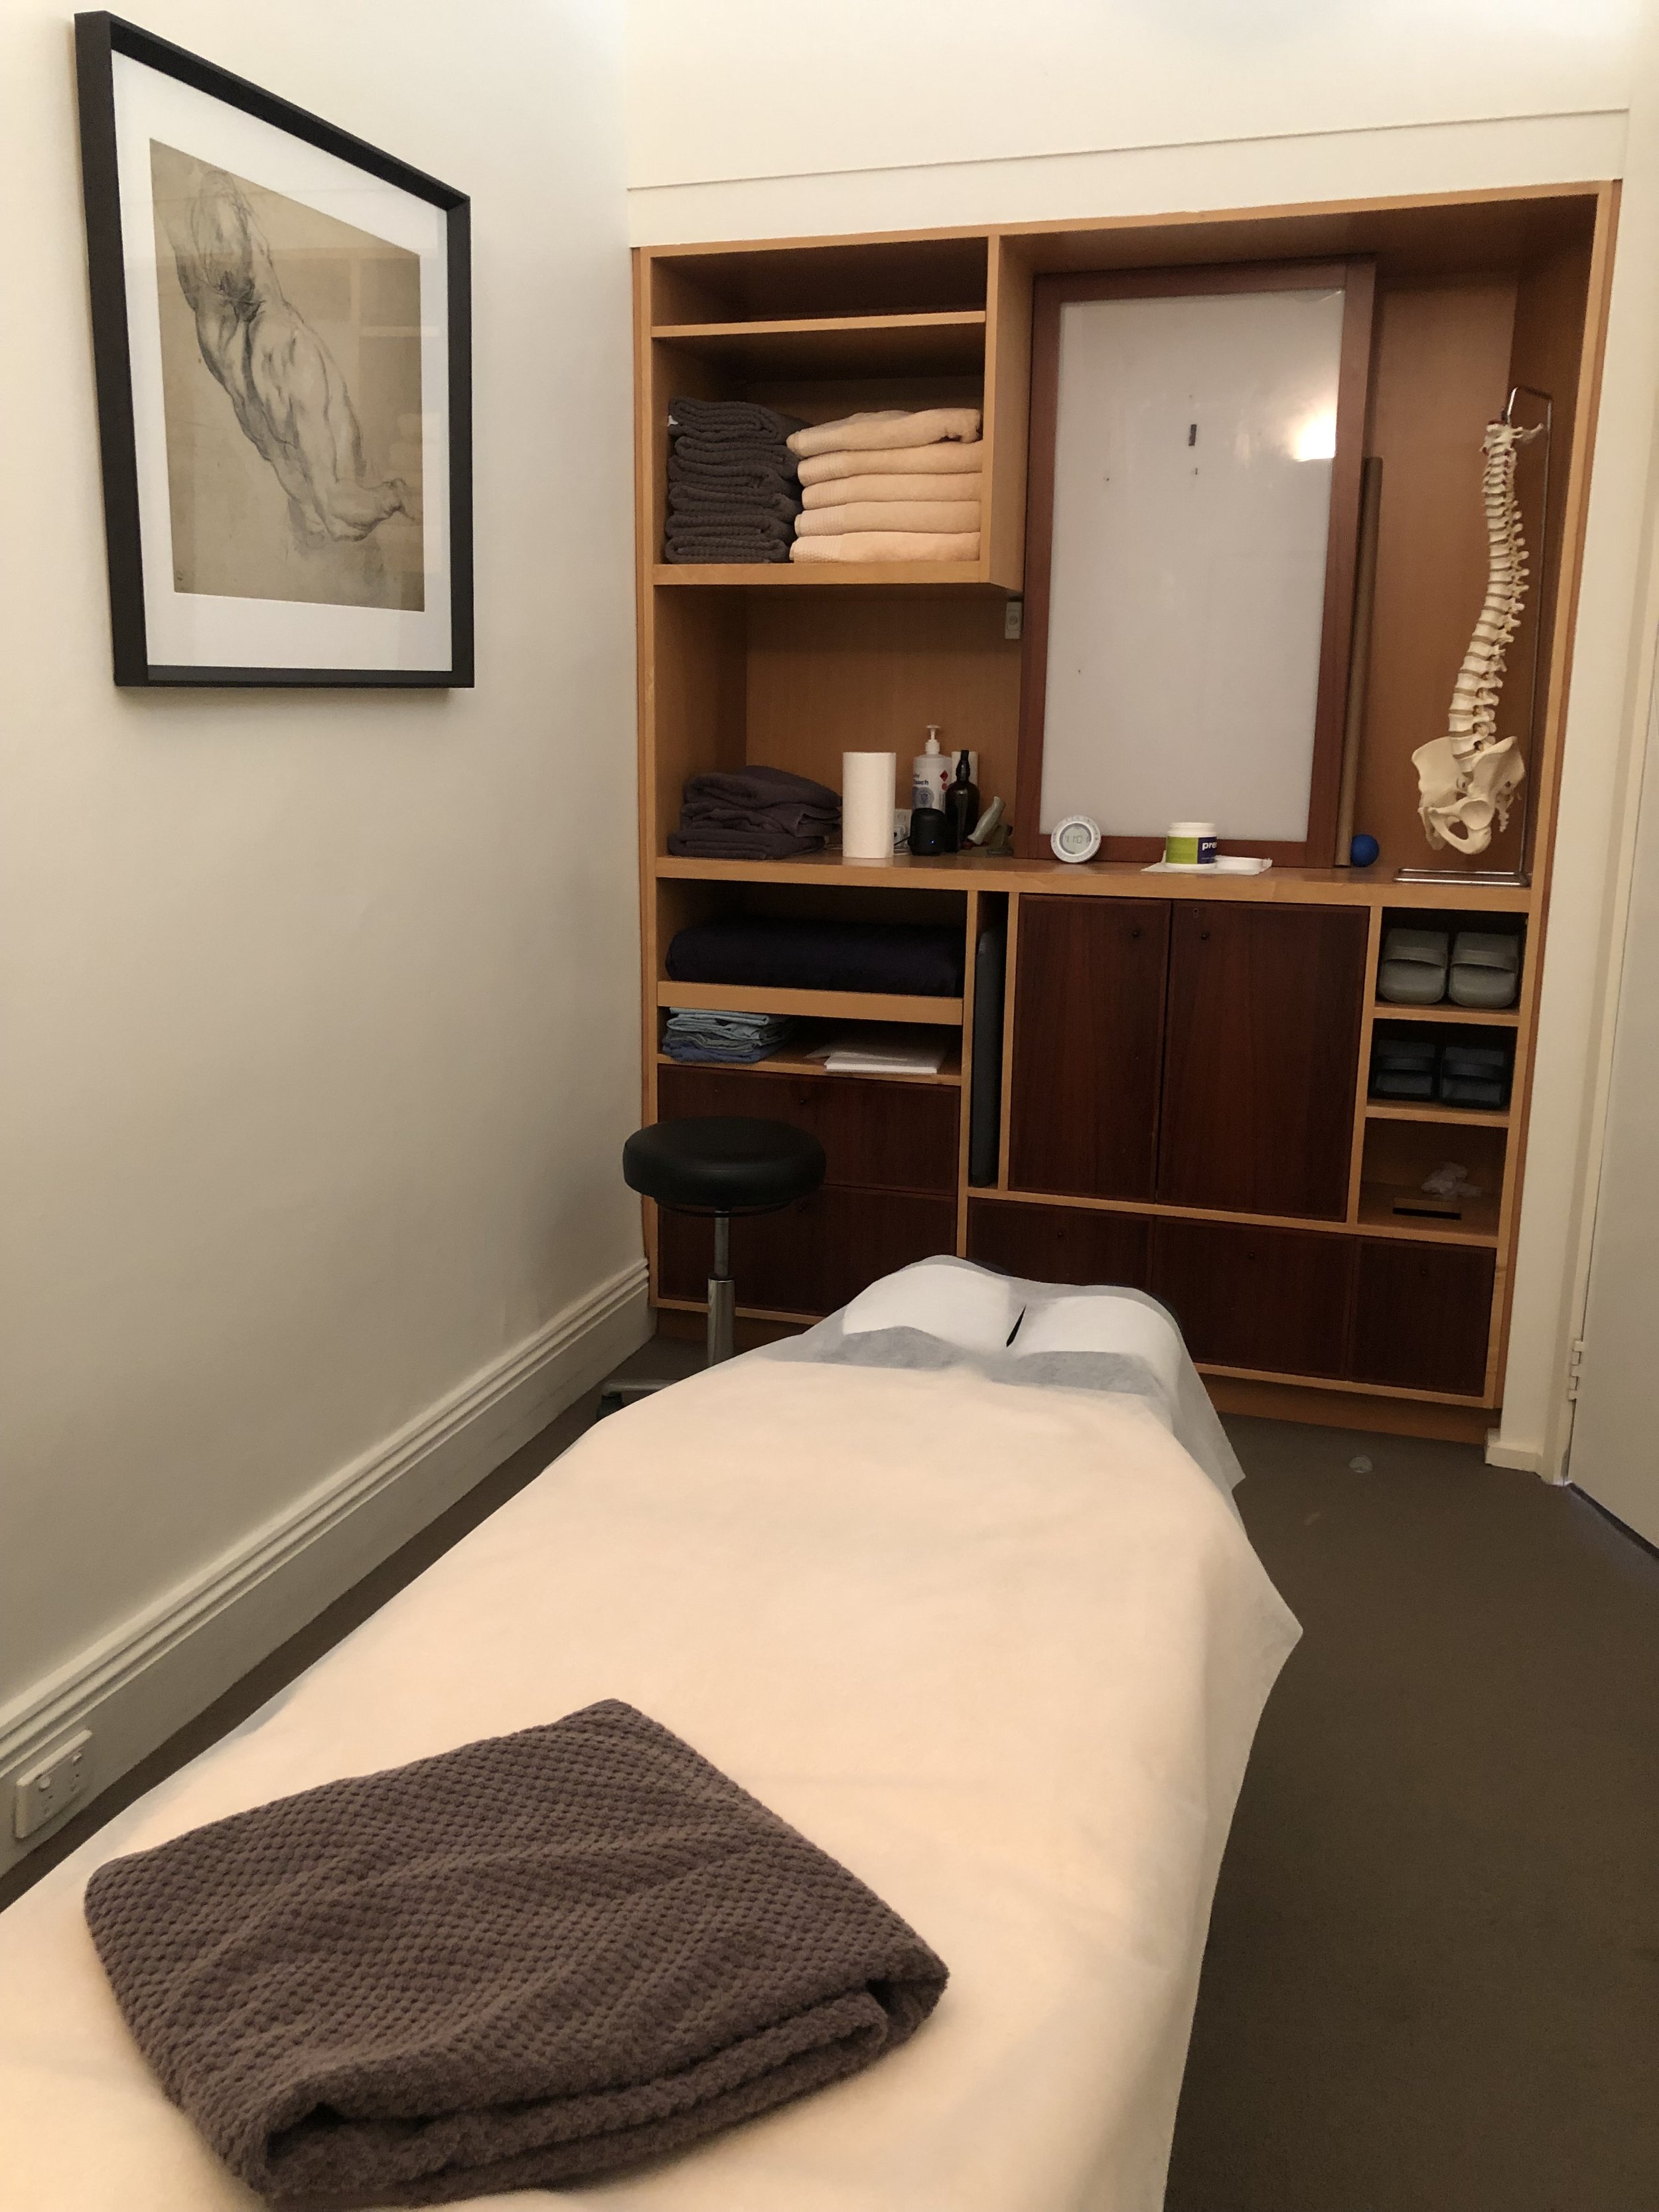 A chiropractic treatment room with a model of the human spine